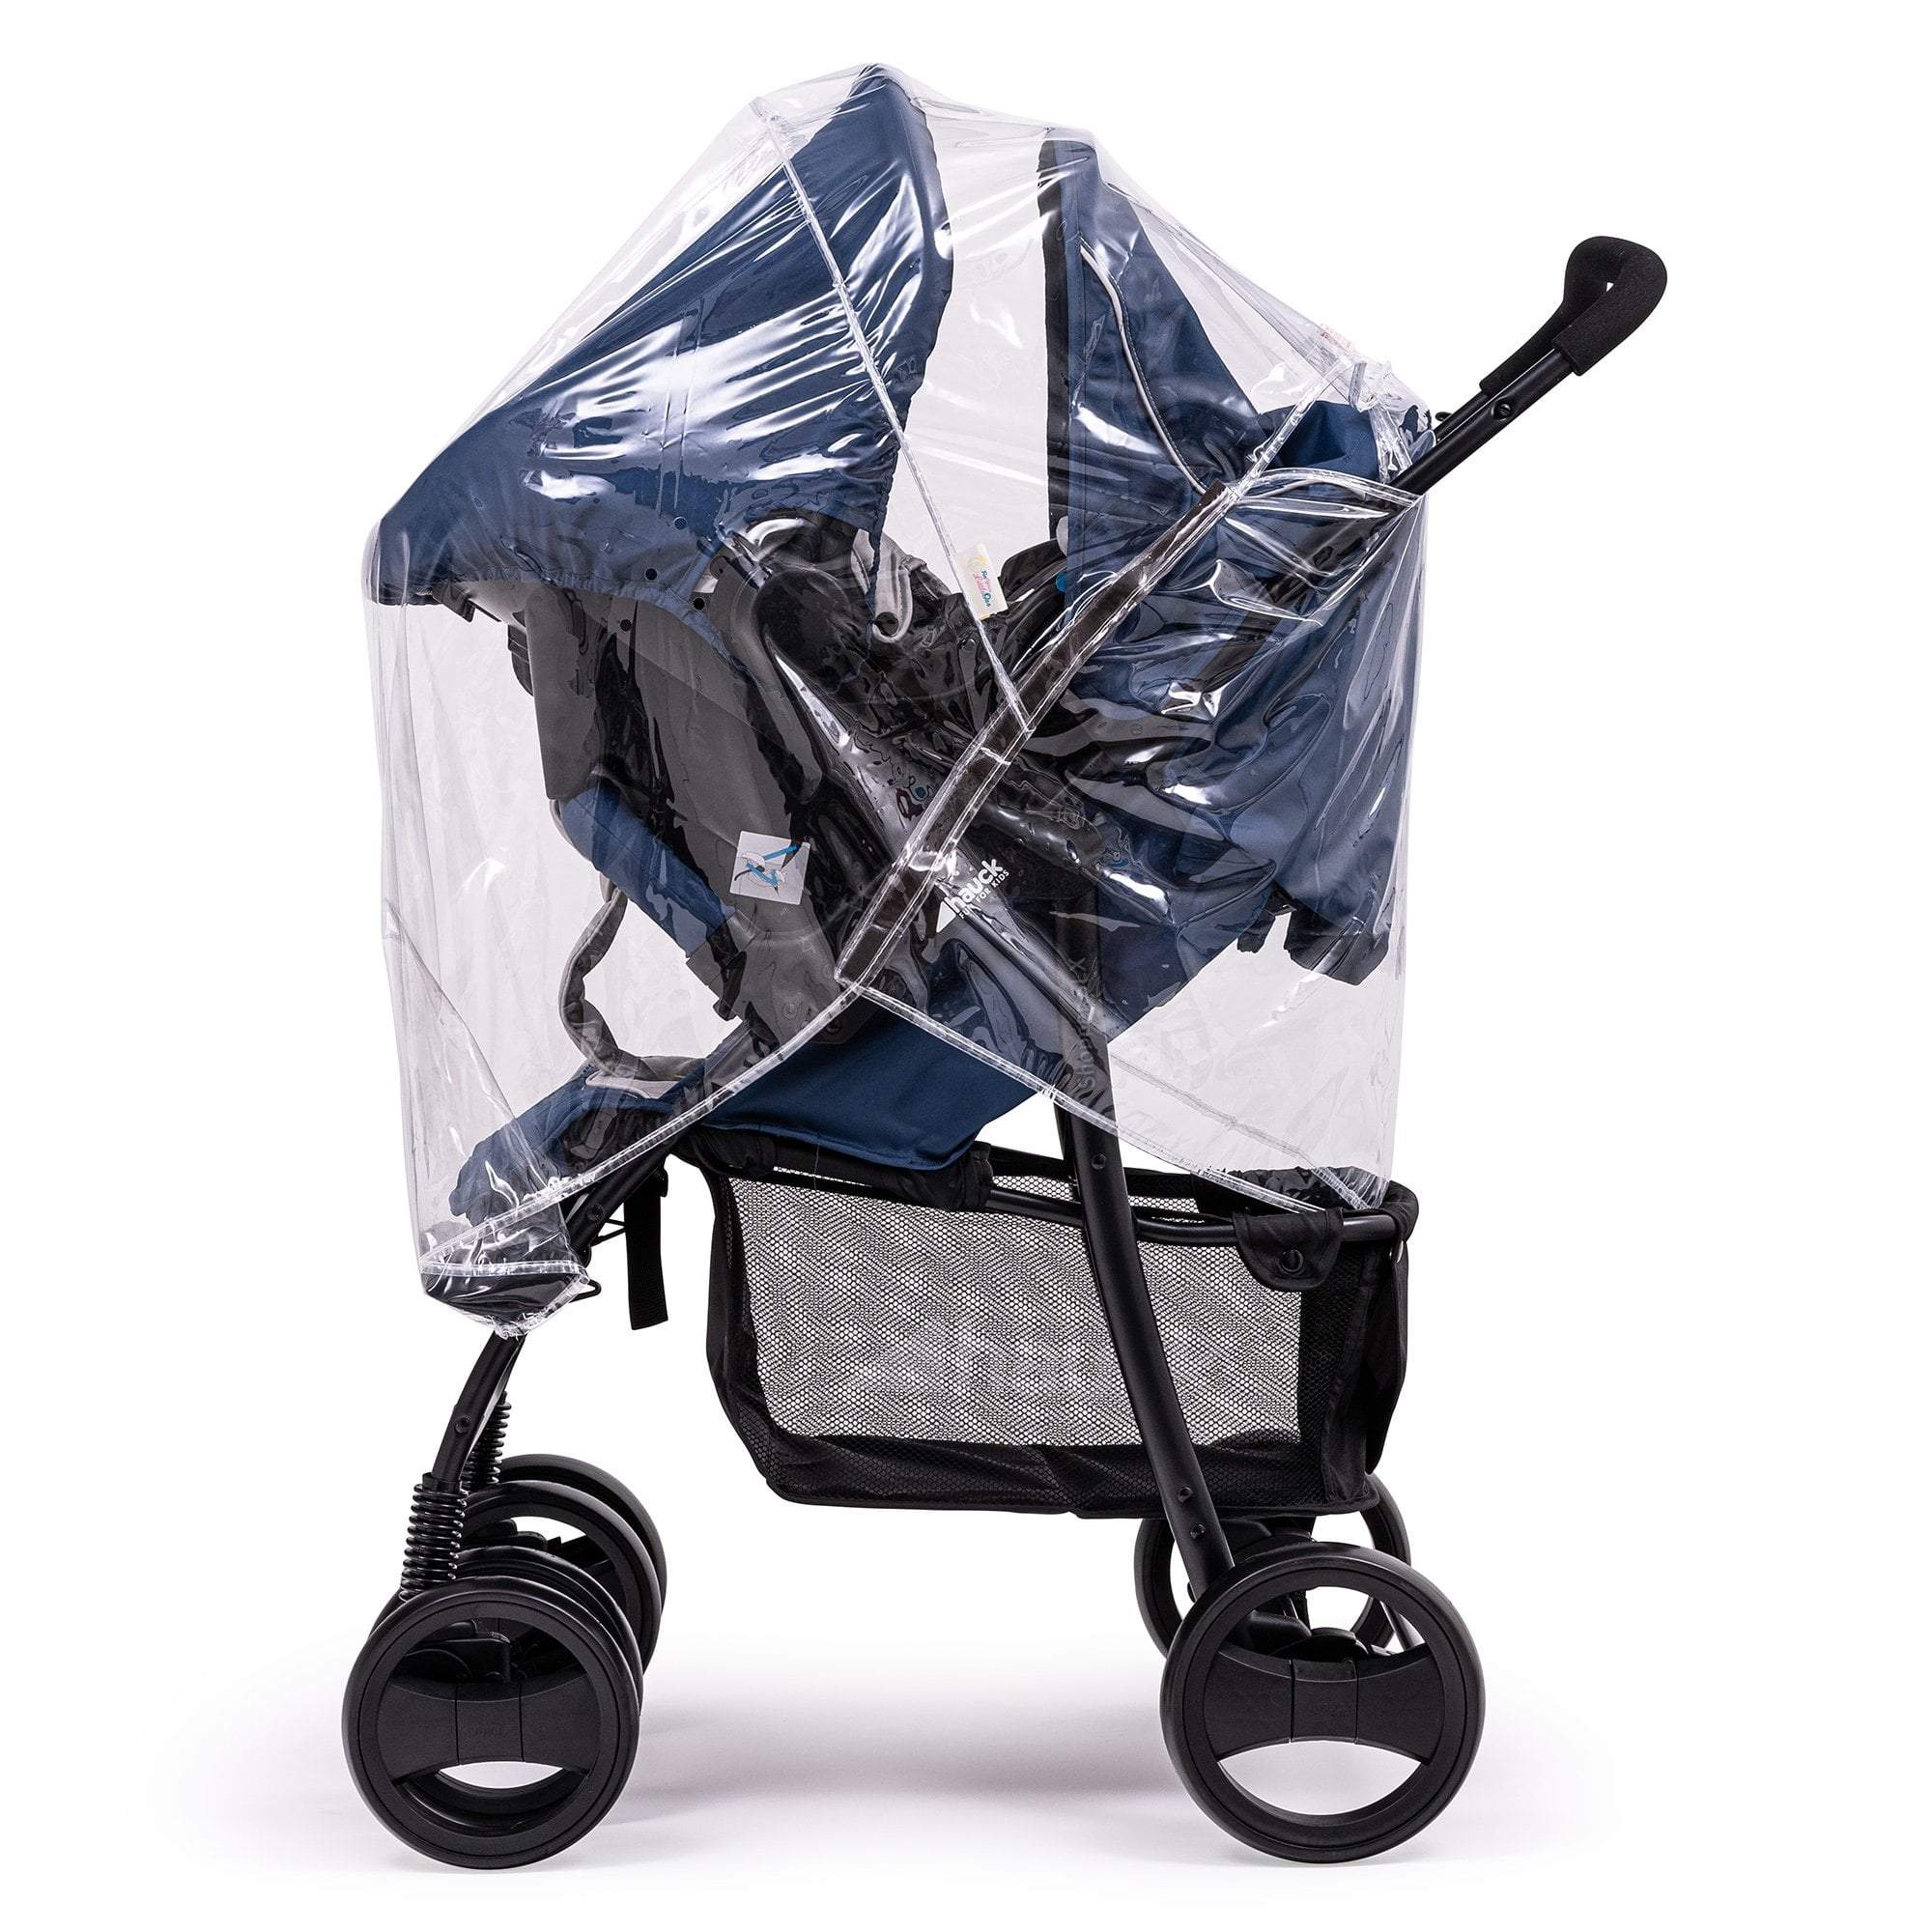 Travel System Raincover Compatible with Mima - Fits All Models - For Your Little One